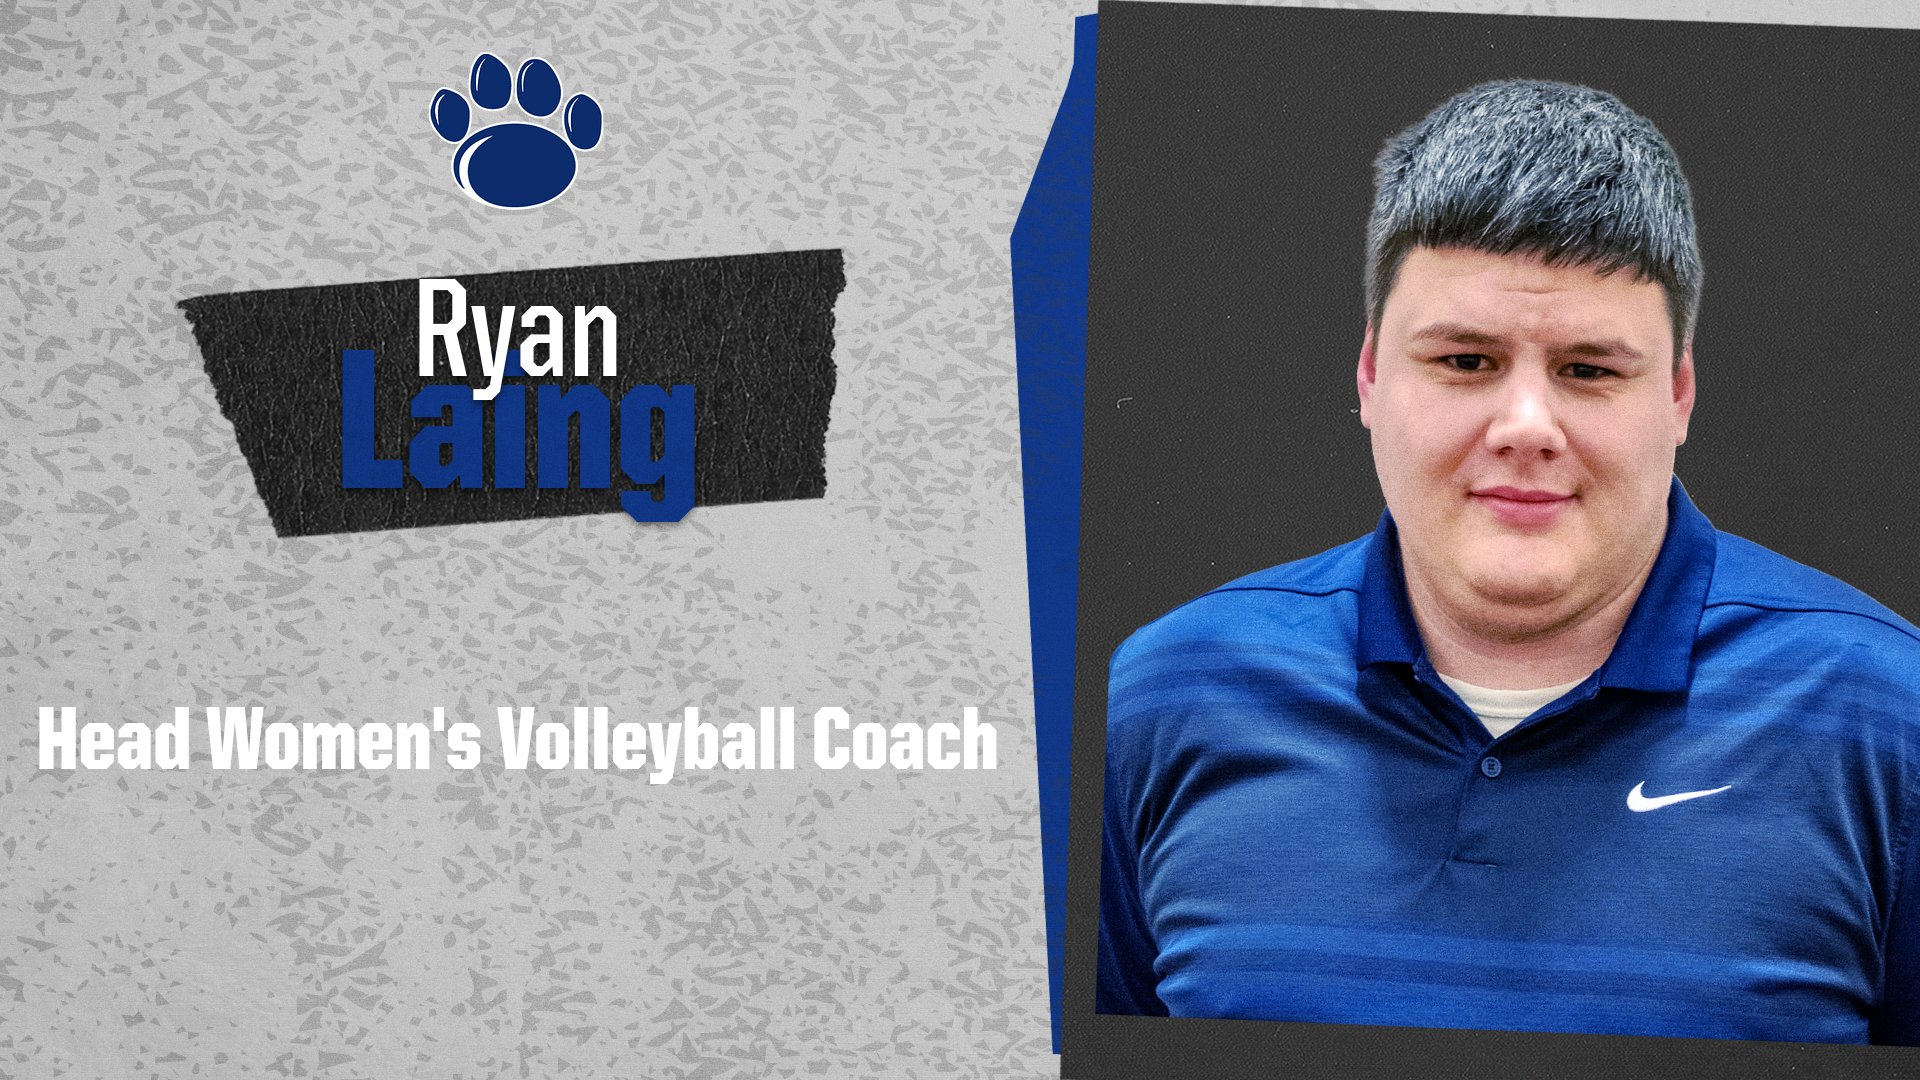 Laing Named Head Women's Volleyball Coach